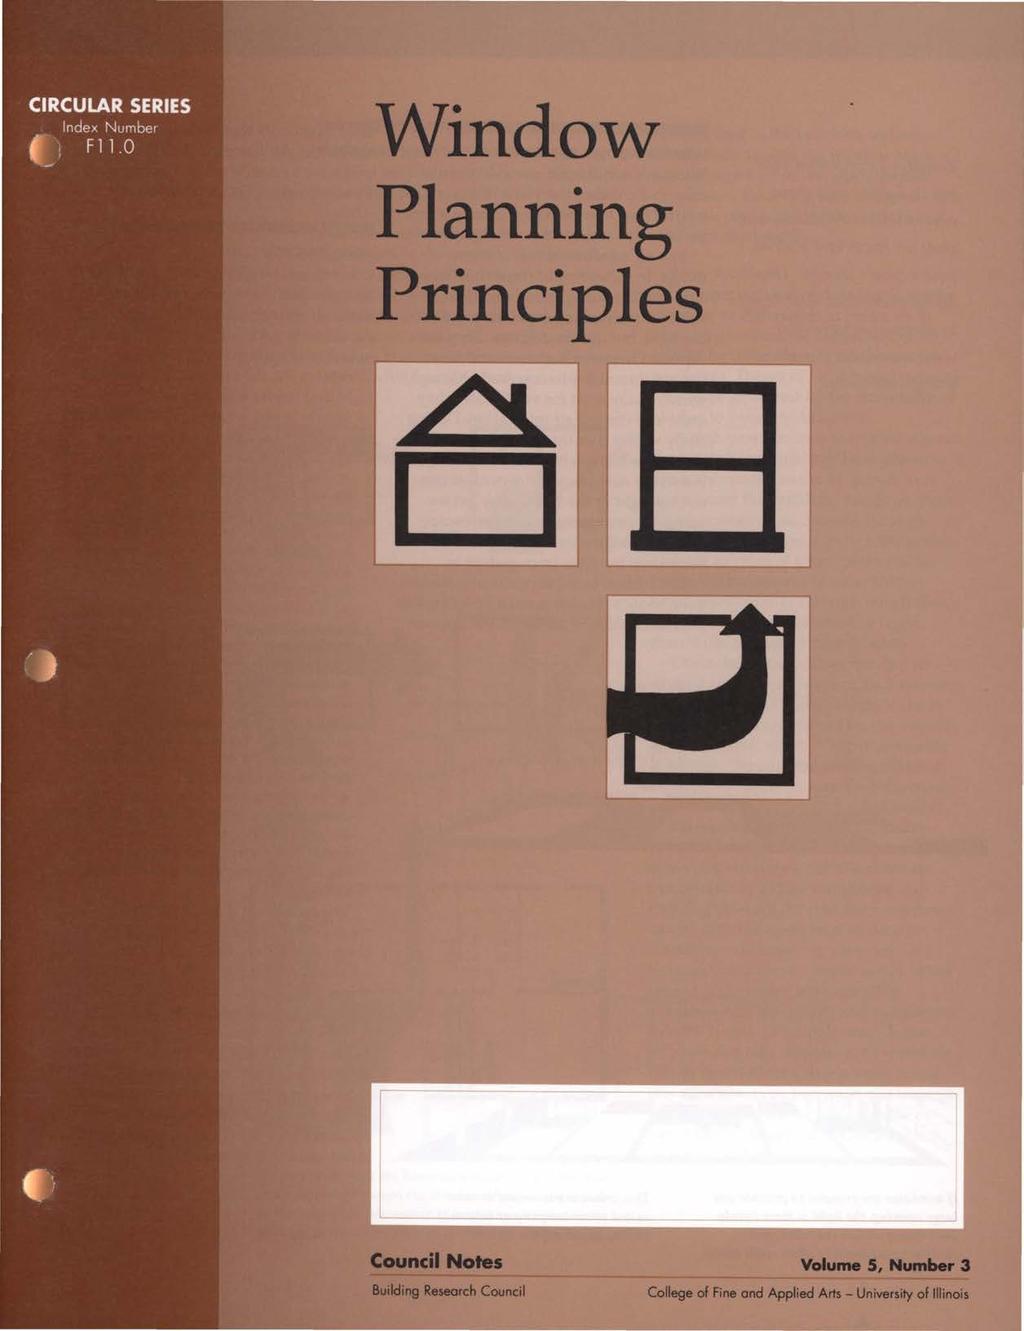 Windo-w Planning Principles a I Council Notes Building Research Council